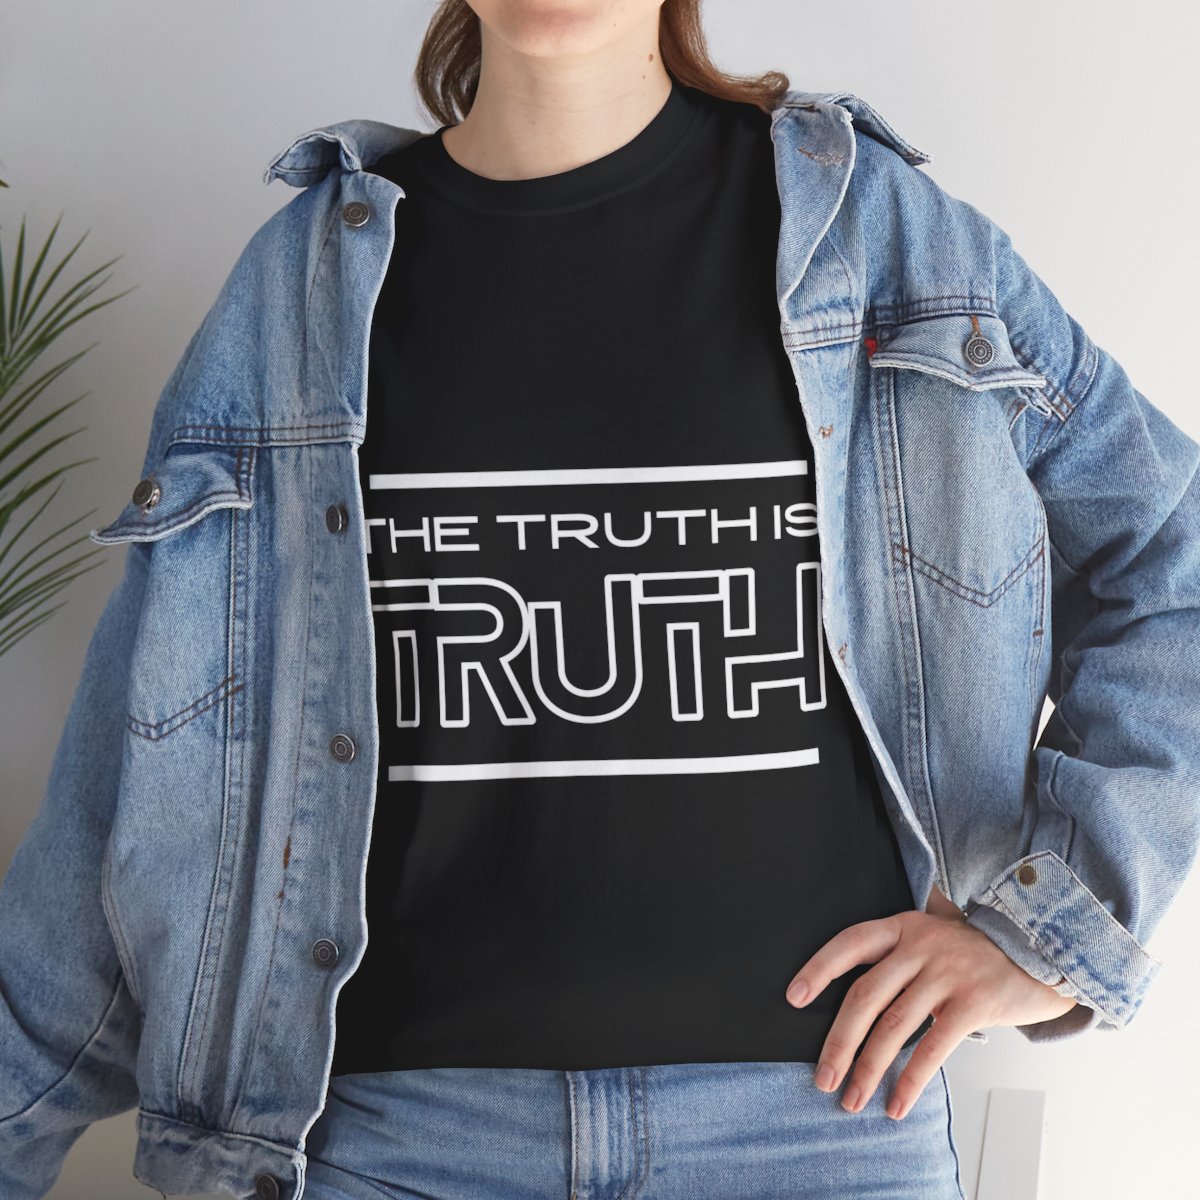 THE TRUTH T-SHIRT product thumbnail image